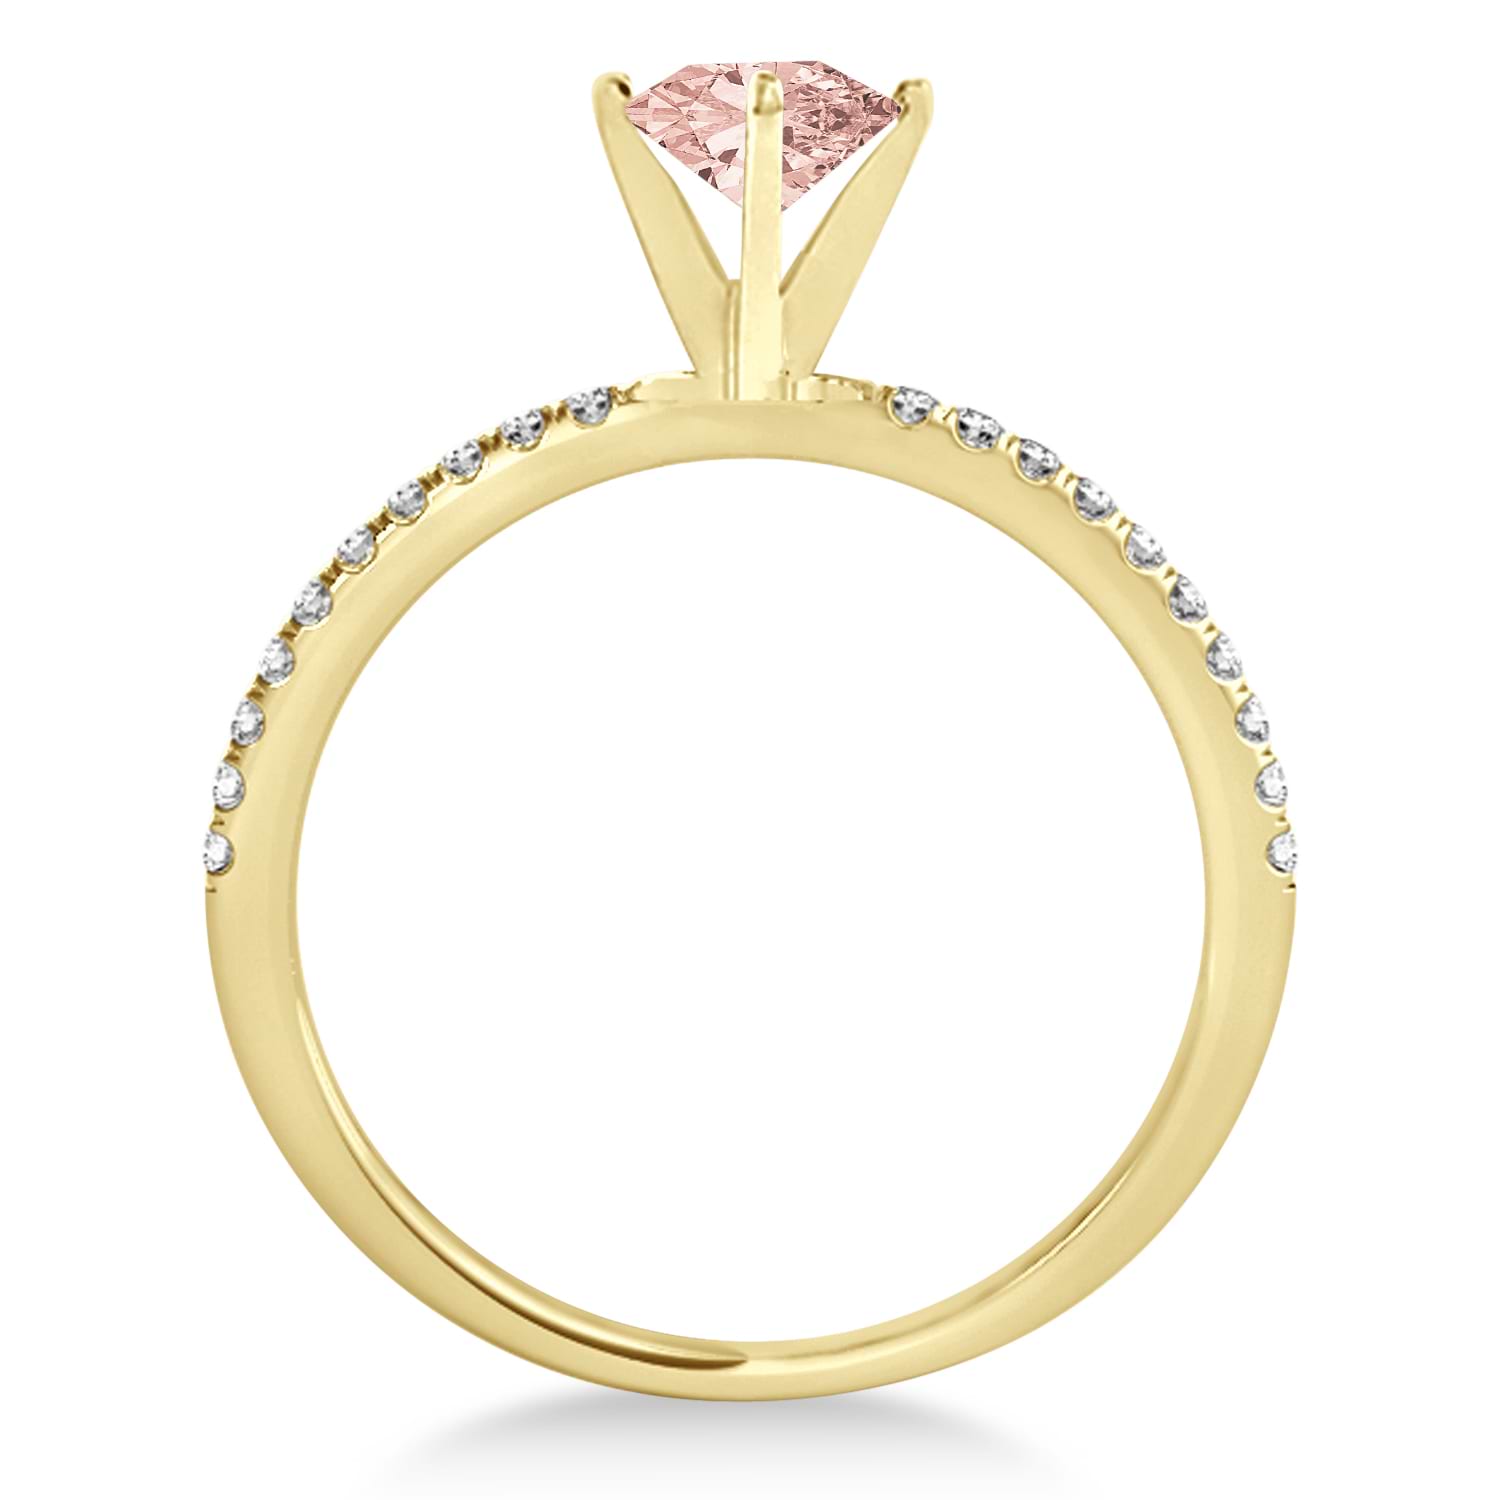 Morganite & Diamond Accented Oval Shape Engagement Ring 14k Yellow Gold (2.50ct)